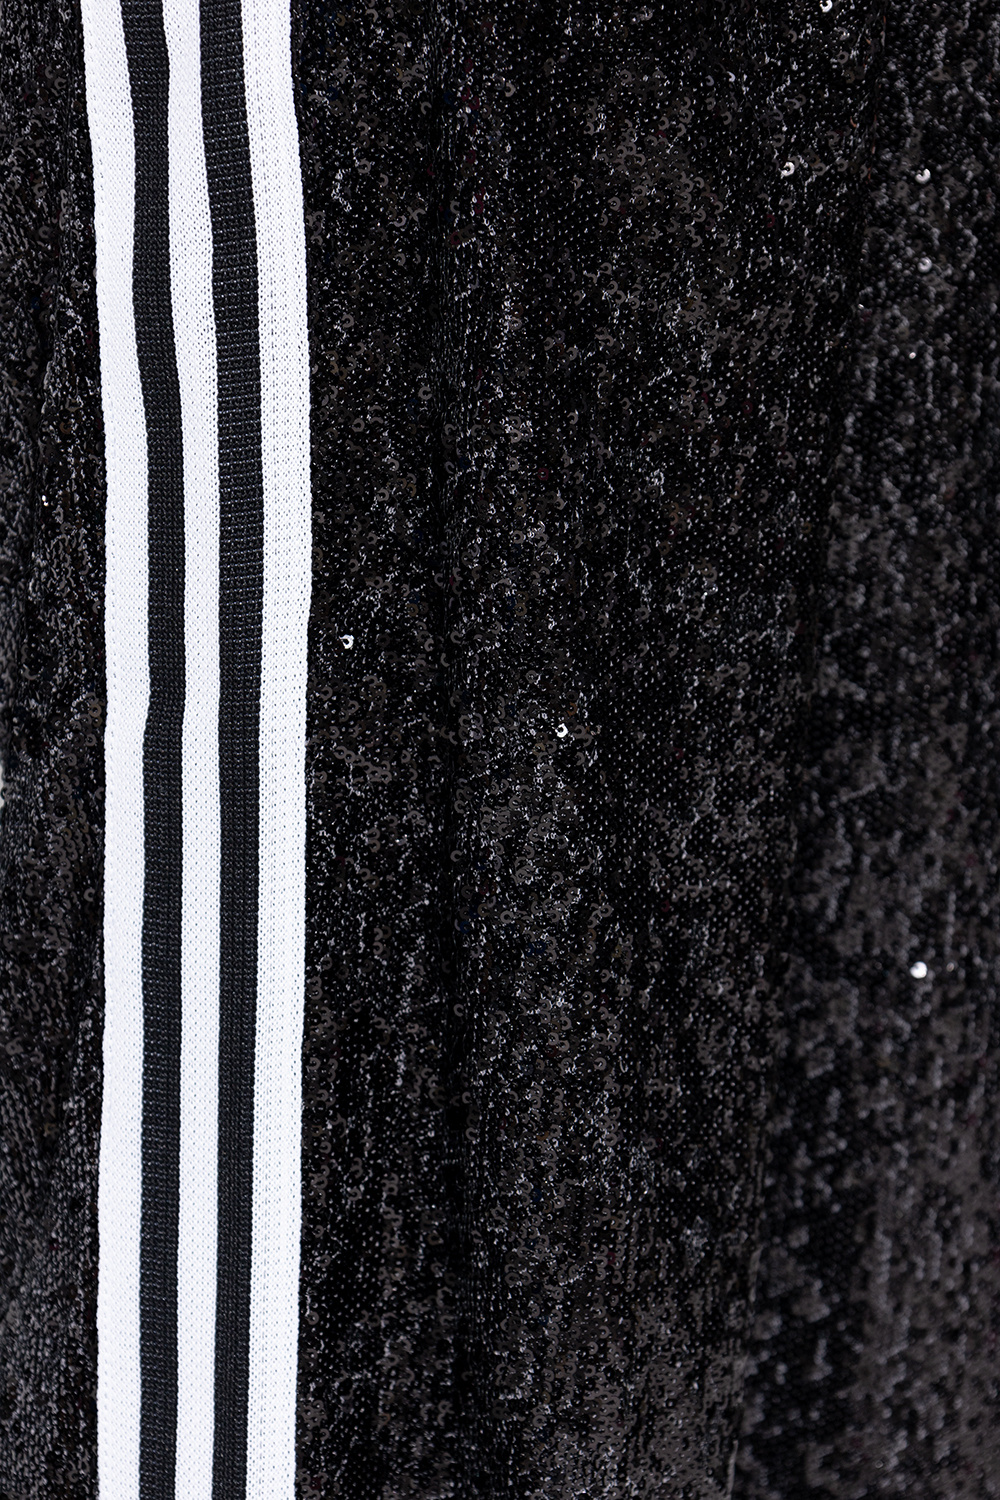 ADIDAS Originals ‘Blue Version’ collection sweatpants with Race